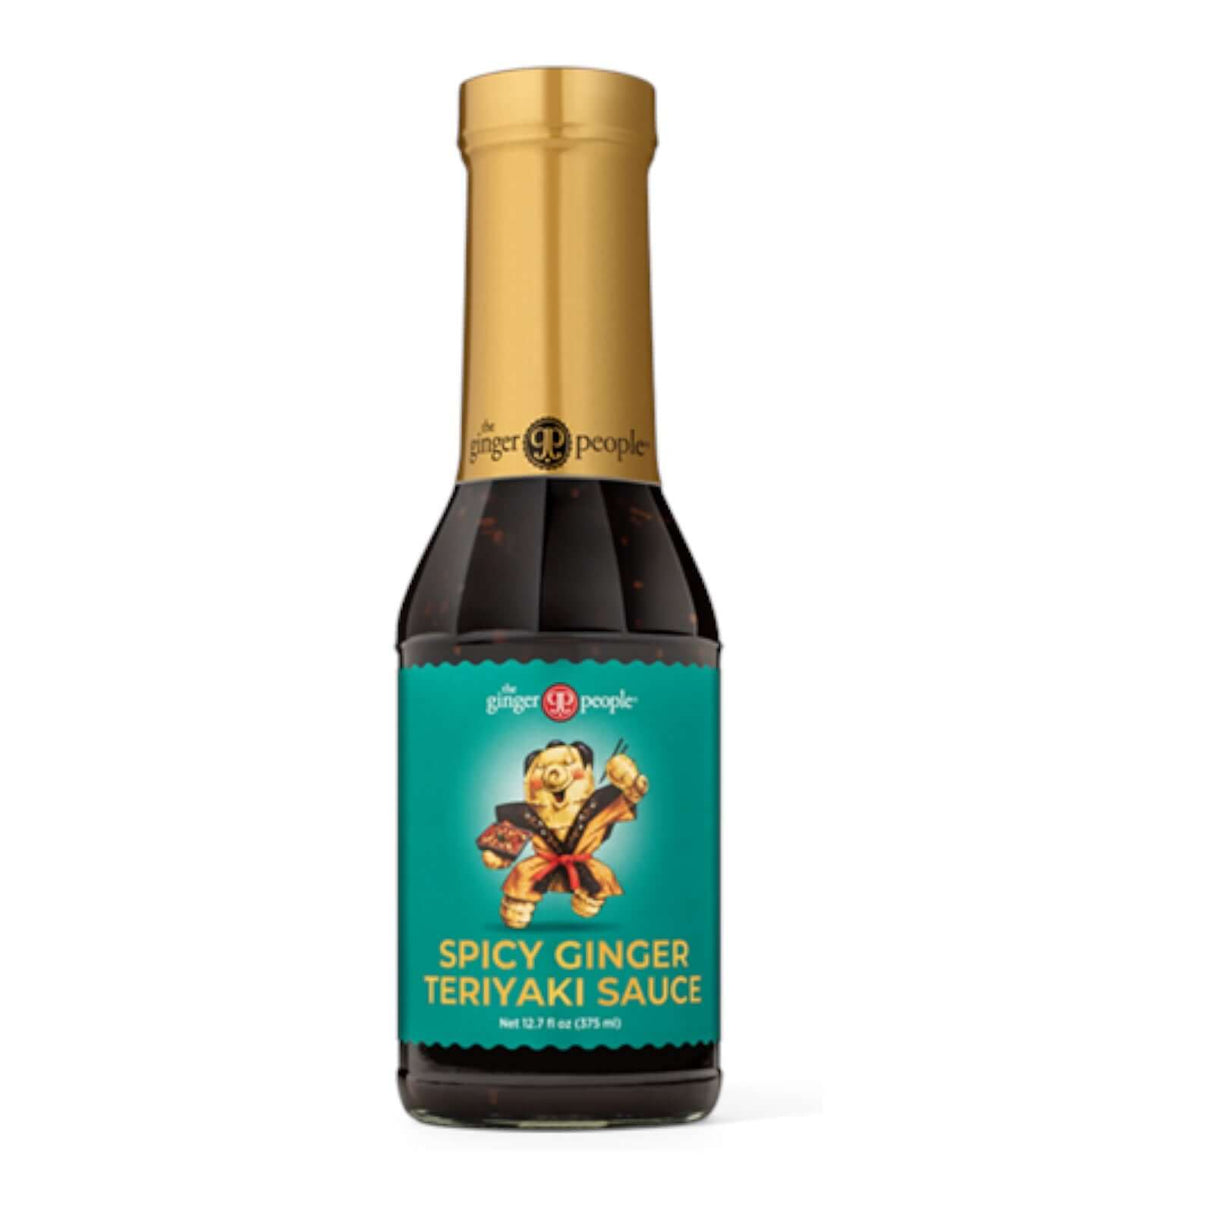 the Ginger People Spicy Ginger Teriyaki Sauce